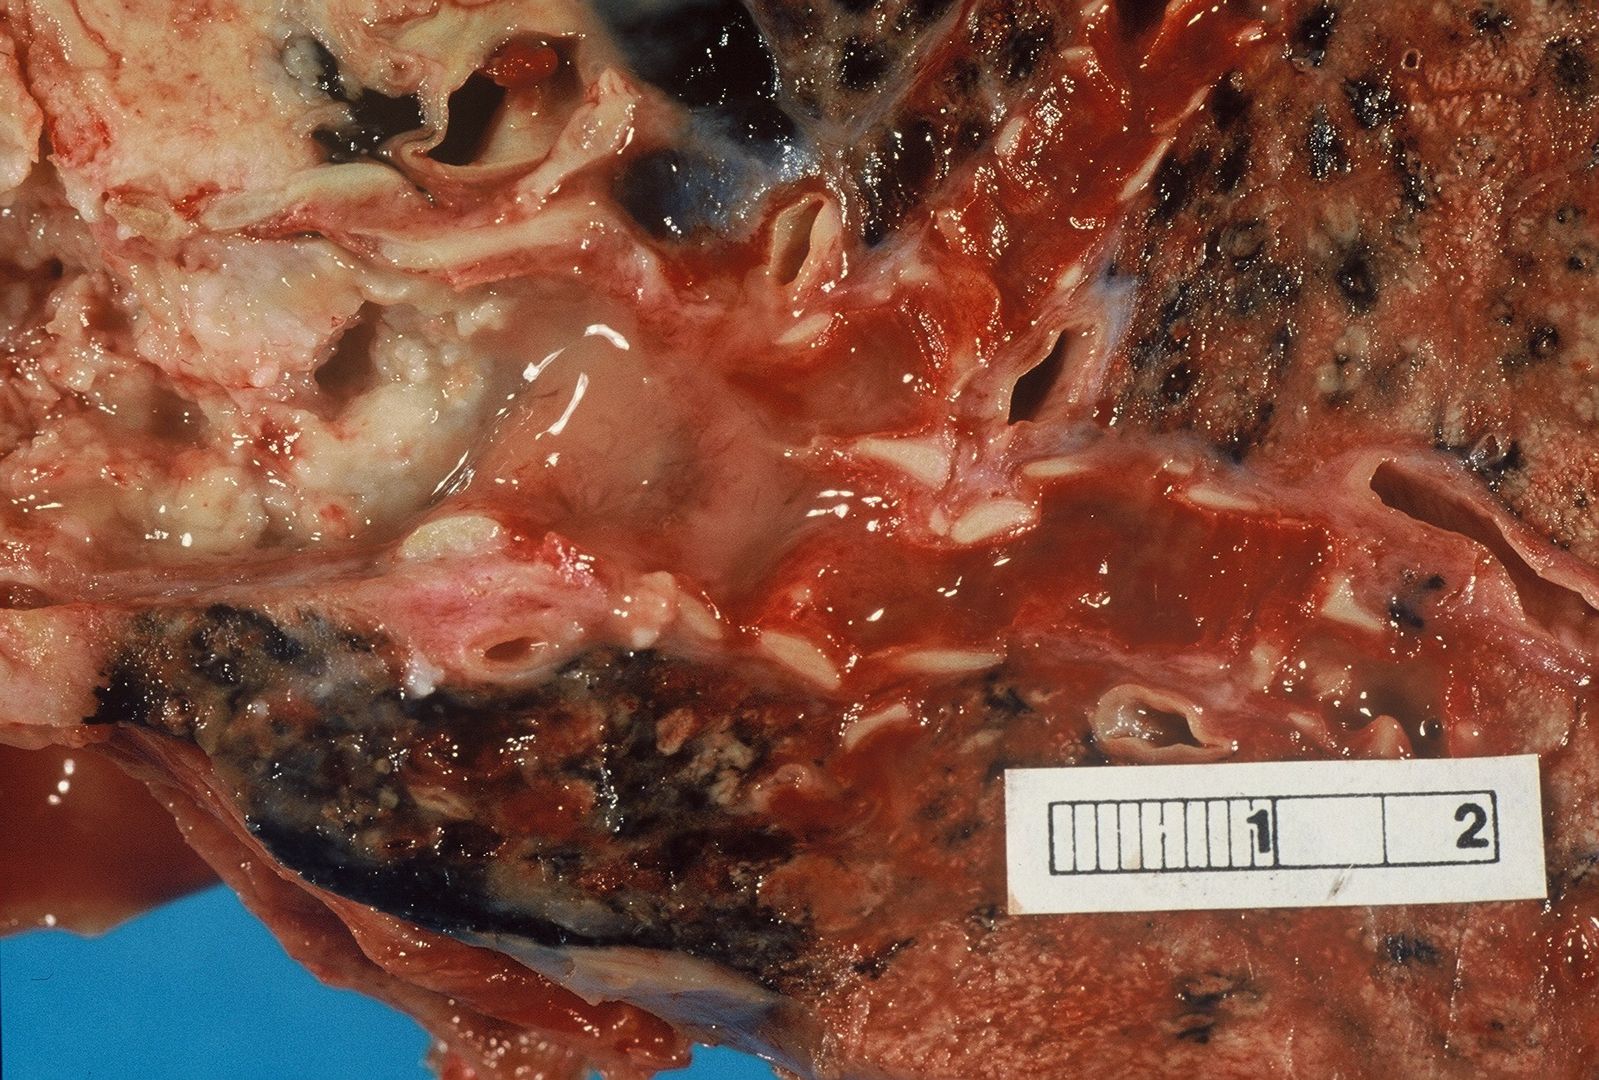 Gross pathology: bronchial squamous lung cell cancer